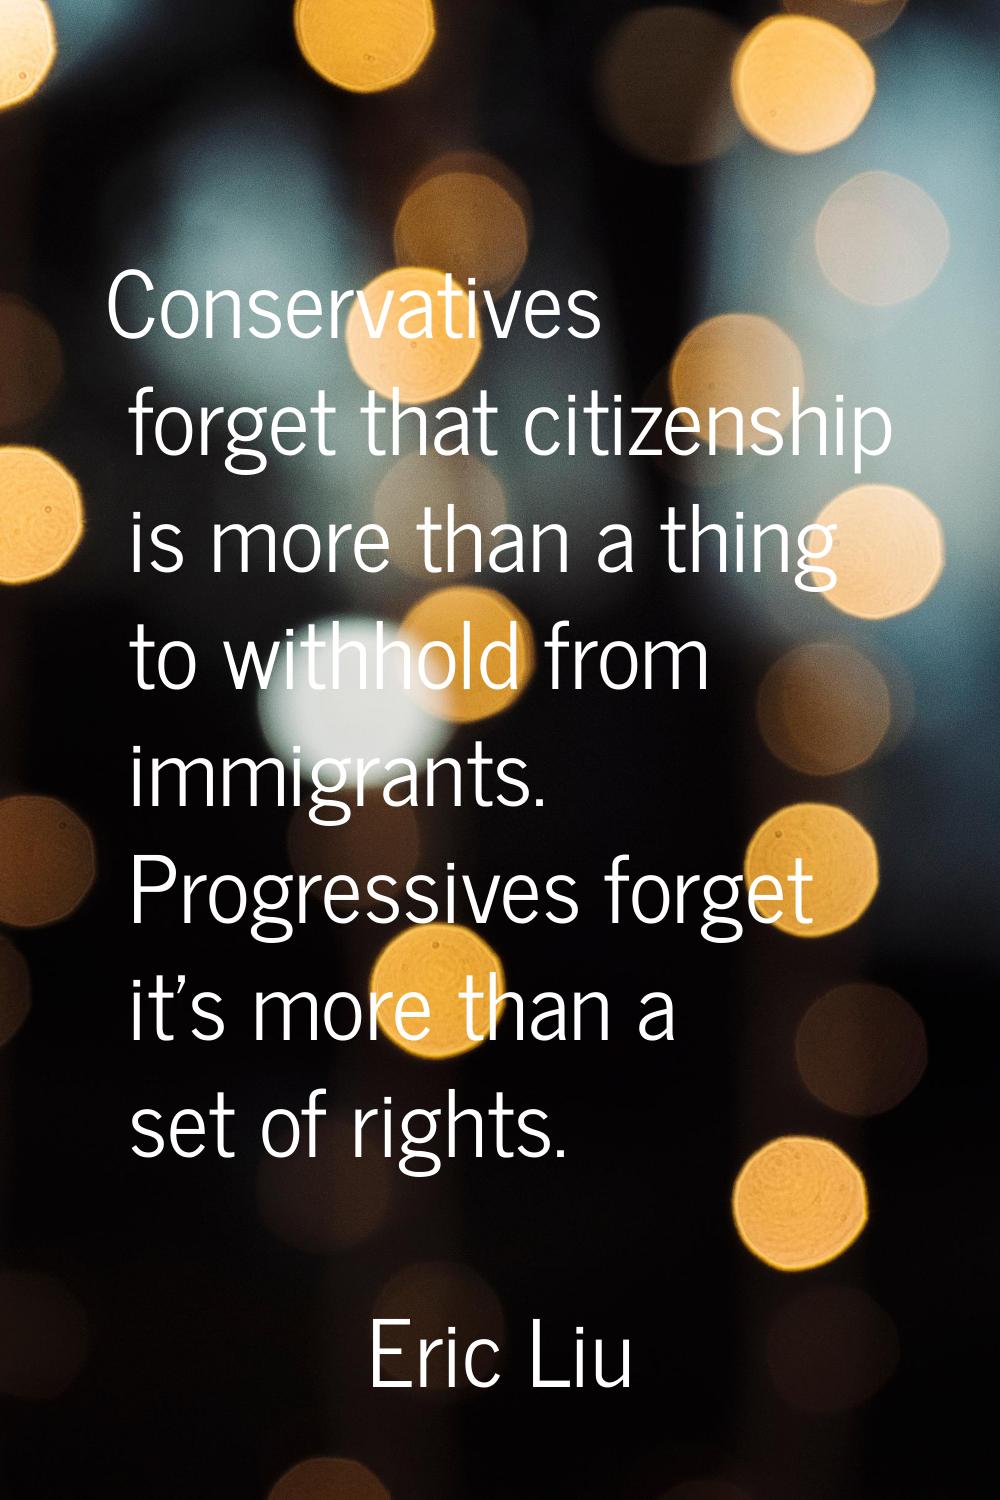 Conservatives forget that citizenship is more than a thing to withhold from immigrants. Progressive